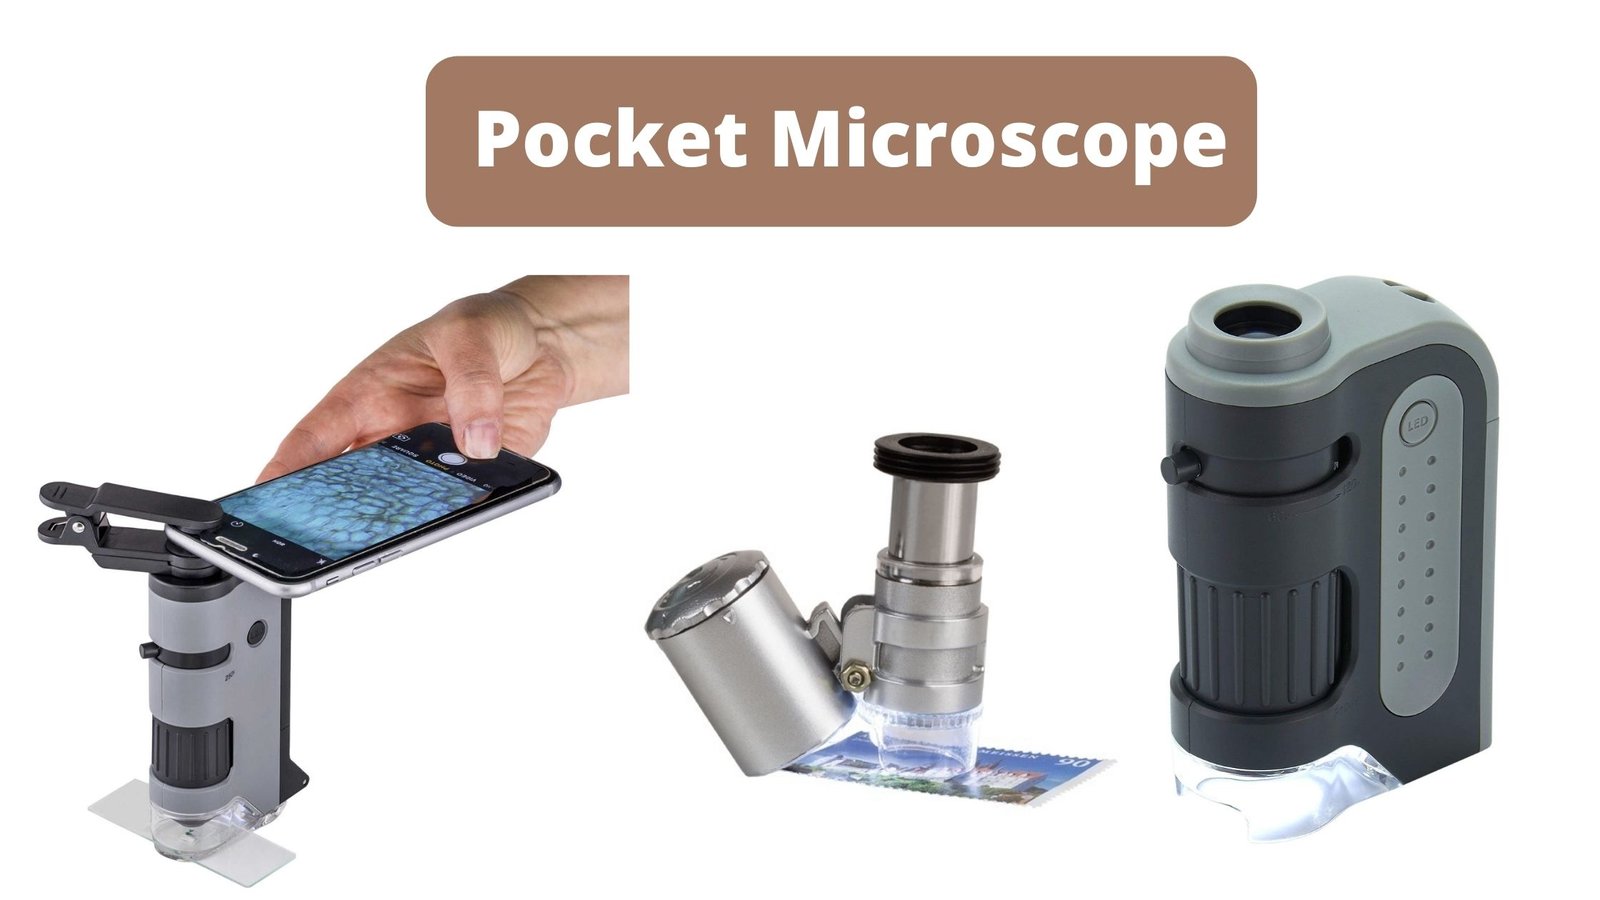 Pocket Microscope - Definition, Parts, Principle, Uses, Types